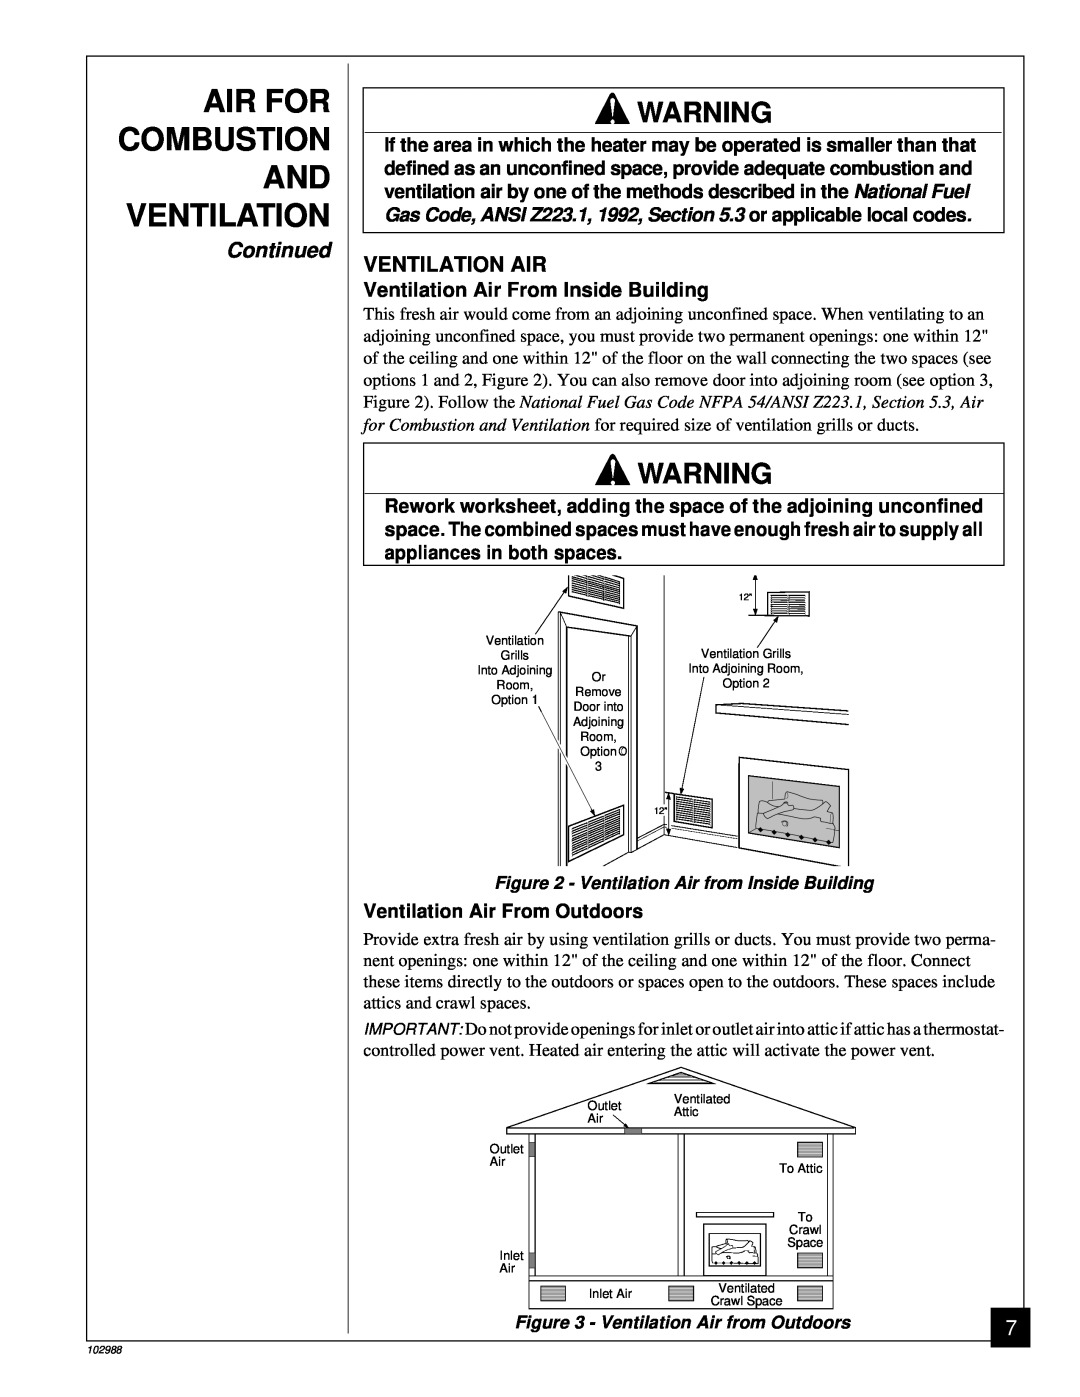 Desa CGS2718N Air For, Combustion, Continued, Ventilation Air from Inside Building, Ventilation Air from Outdoors 